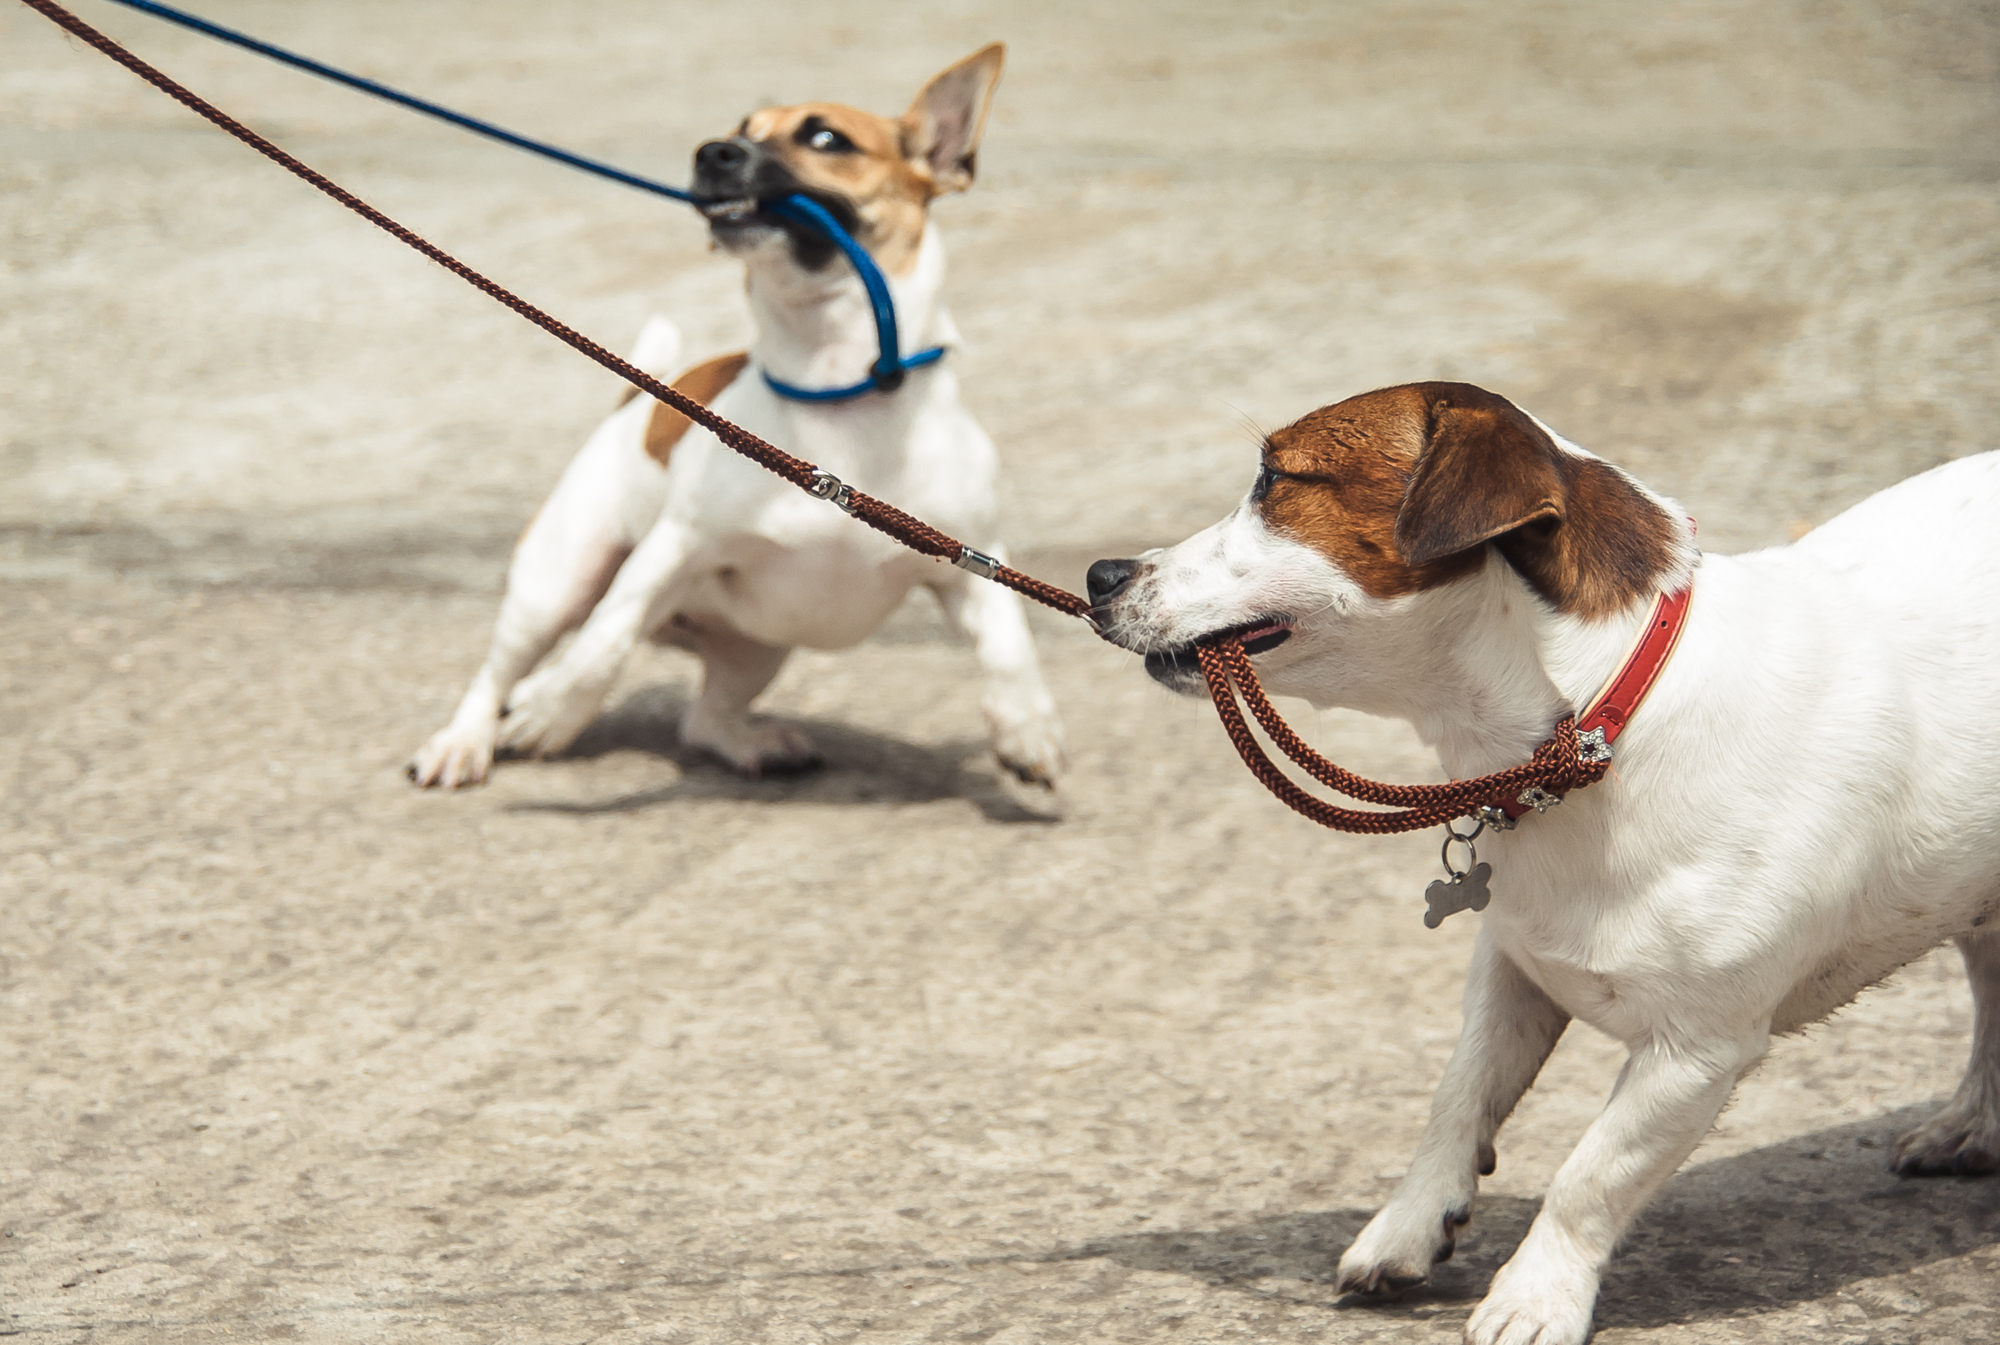 Two dogs tugging on leashes